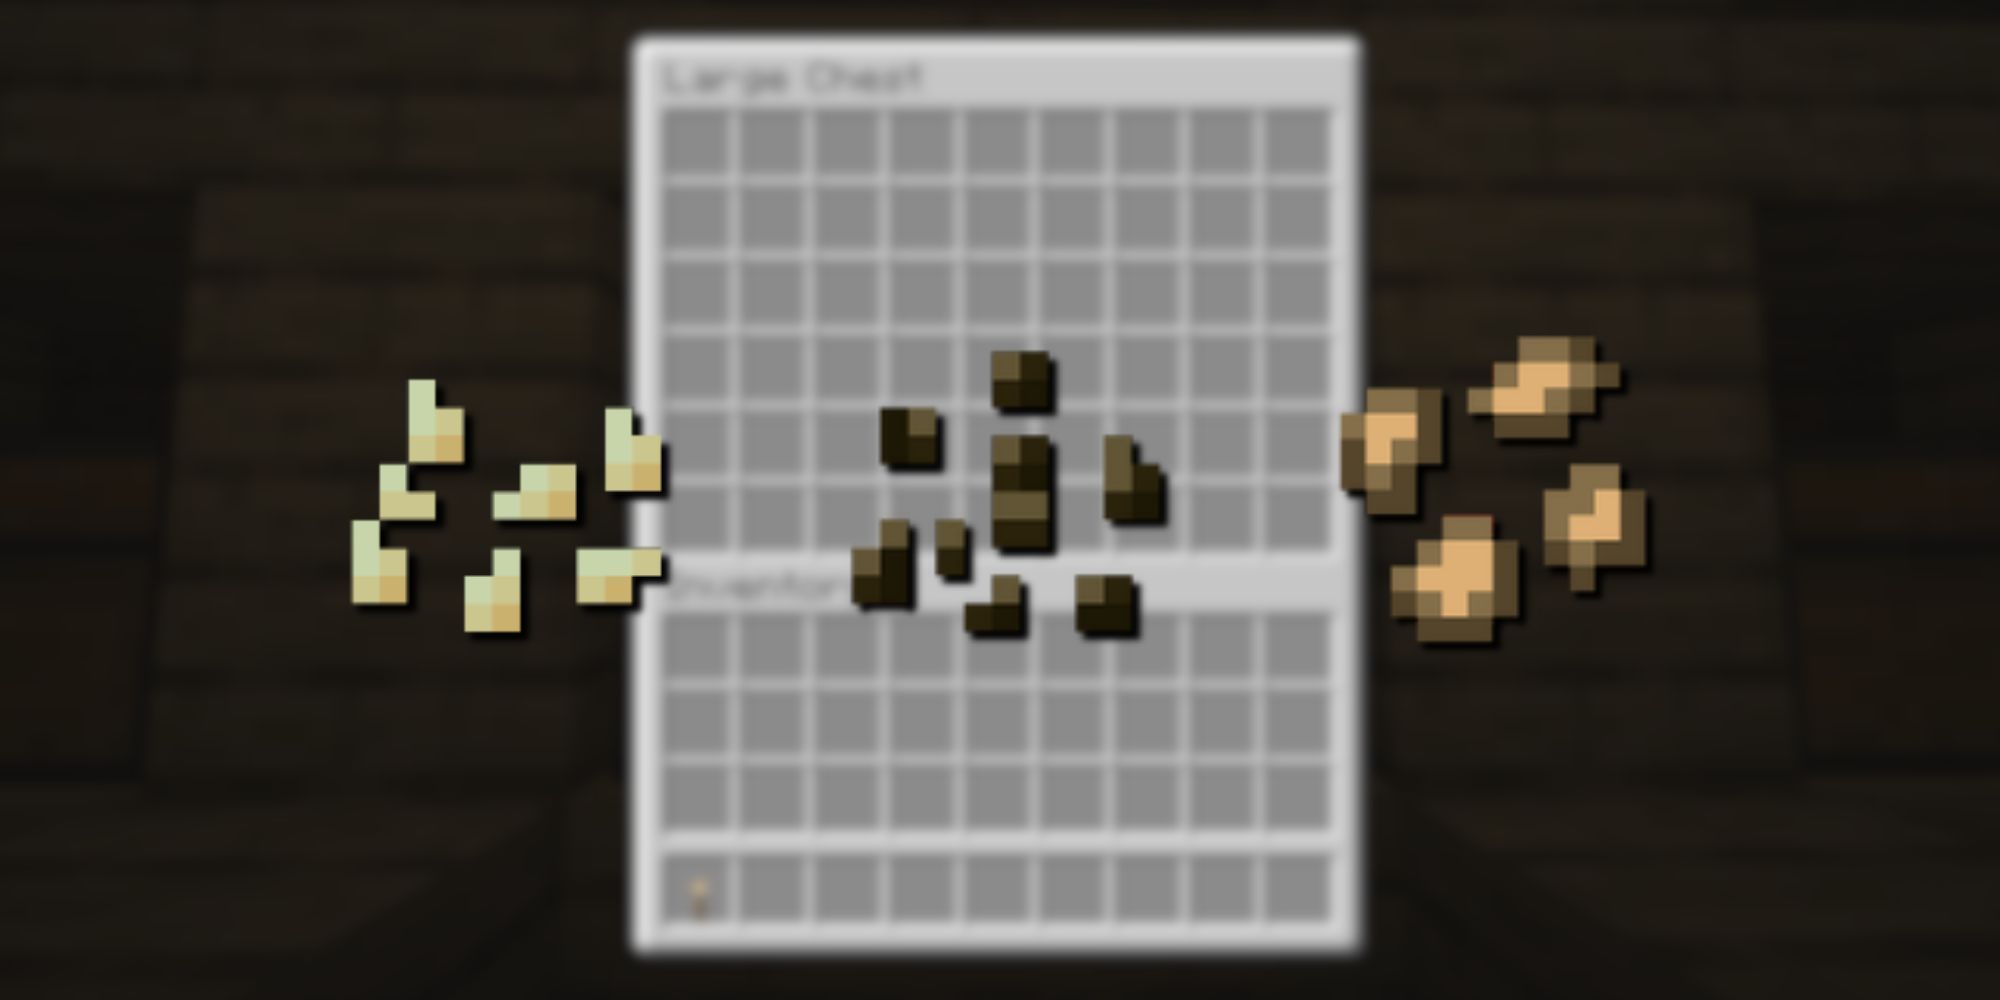 White pumpkin seeds, dark melon seeds, and beige beetroot seeds overlayed over a blurred chest inventory.